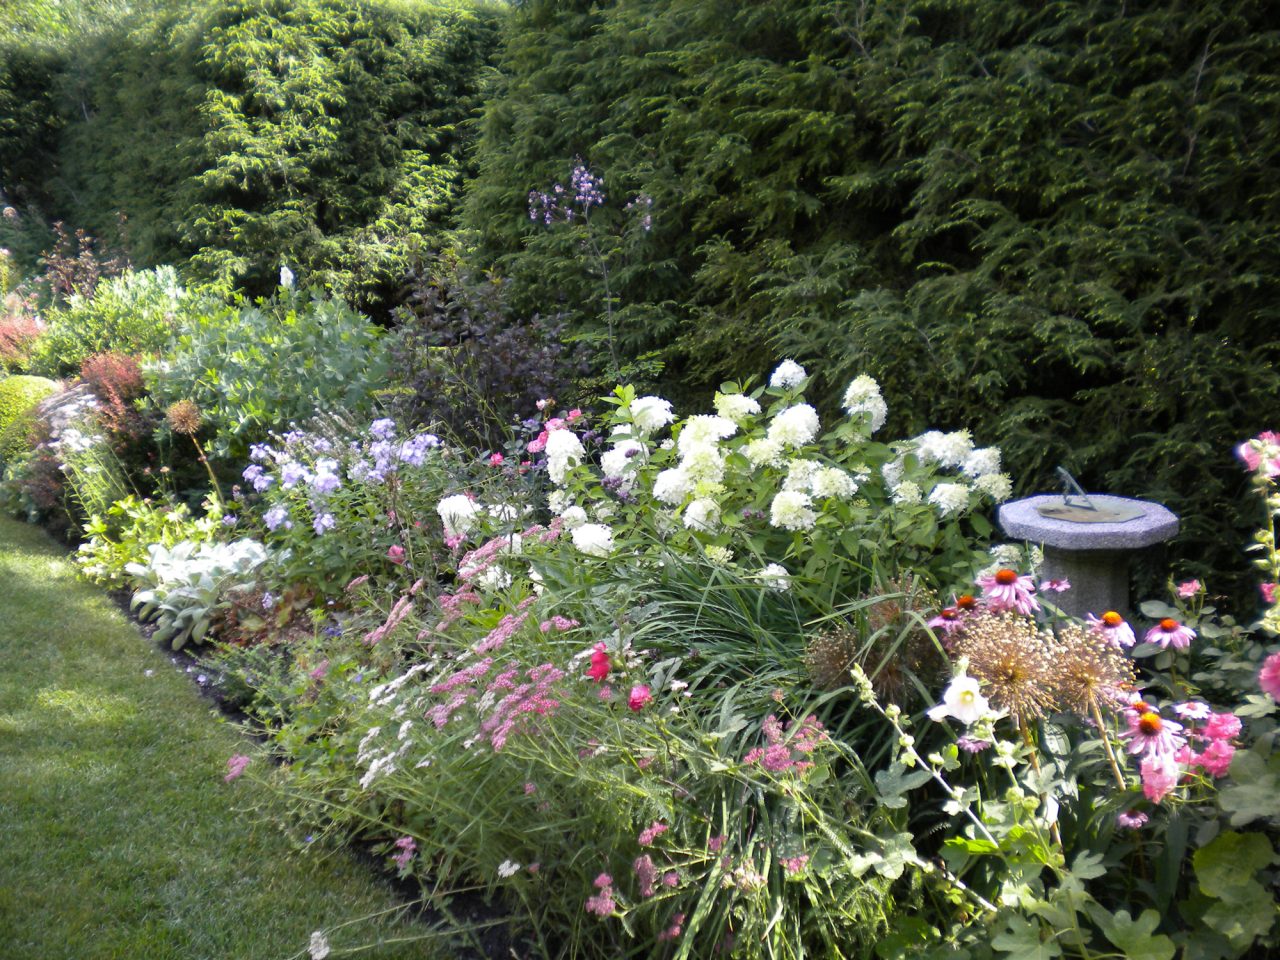 Lush perennial border with white hydrangea, and pink floral accents and sundial accent